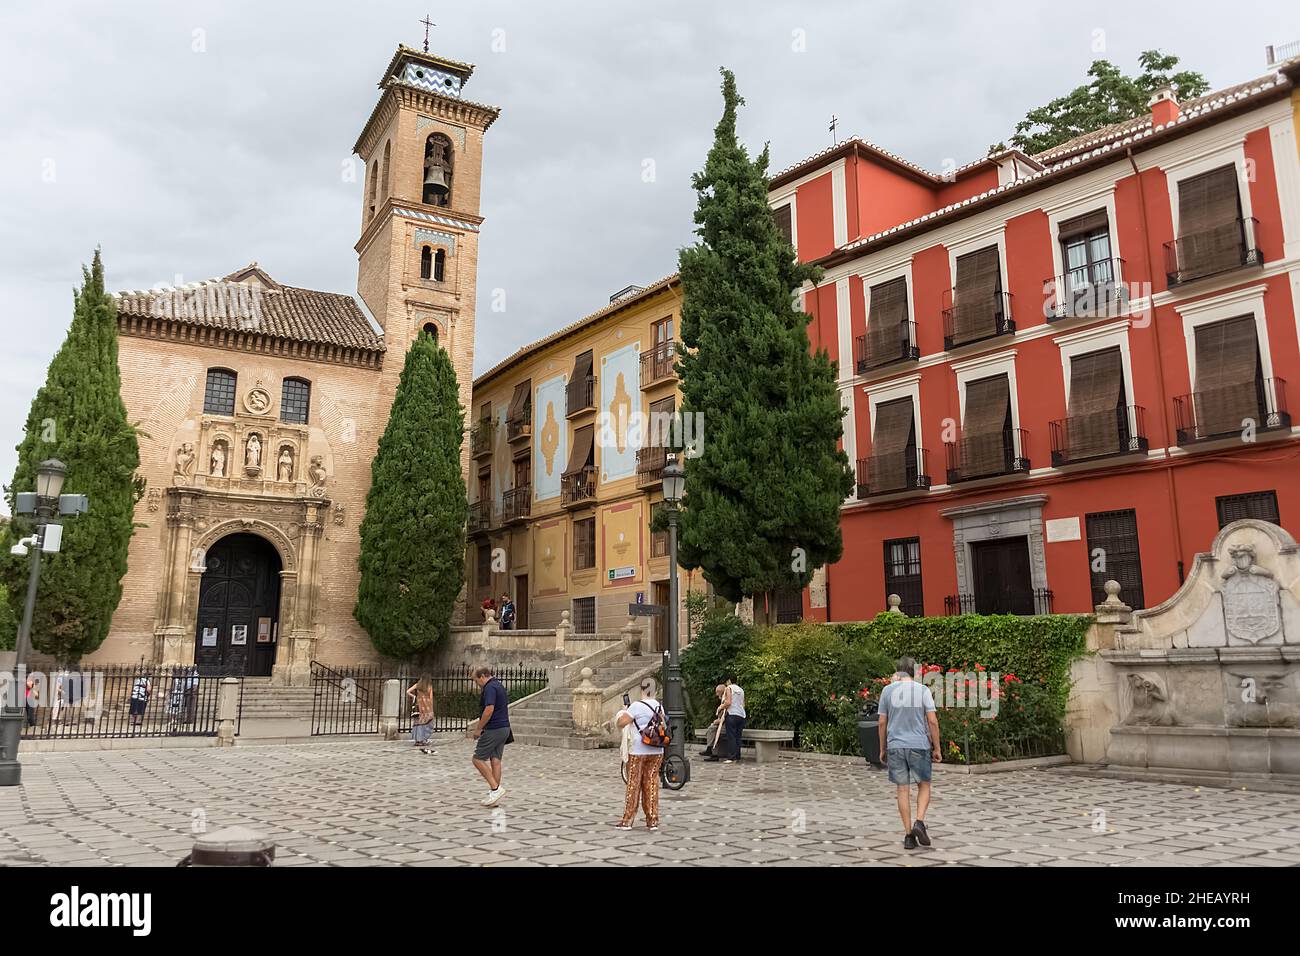 Granada Spain - 09 14 2021: View at the St. Ana square with San Gil and Santa Ana Church, heritage colored buildings and Carrera del Darro to the stre Stock Photo